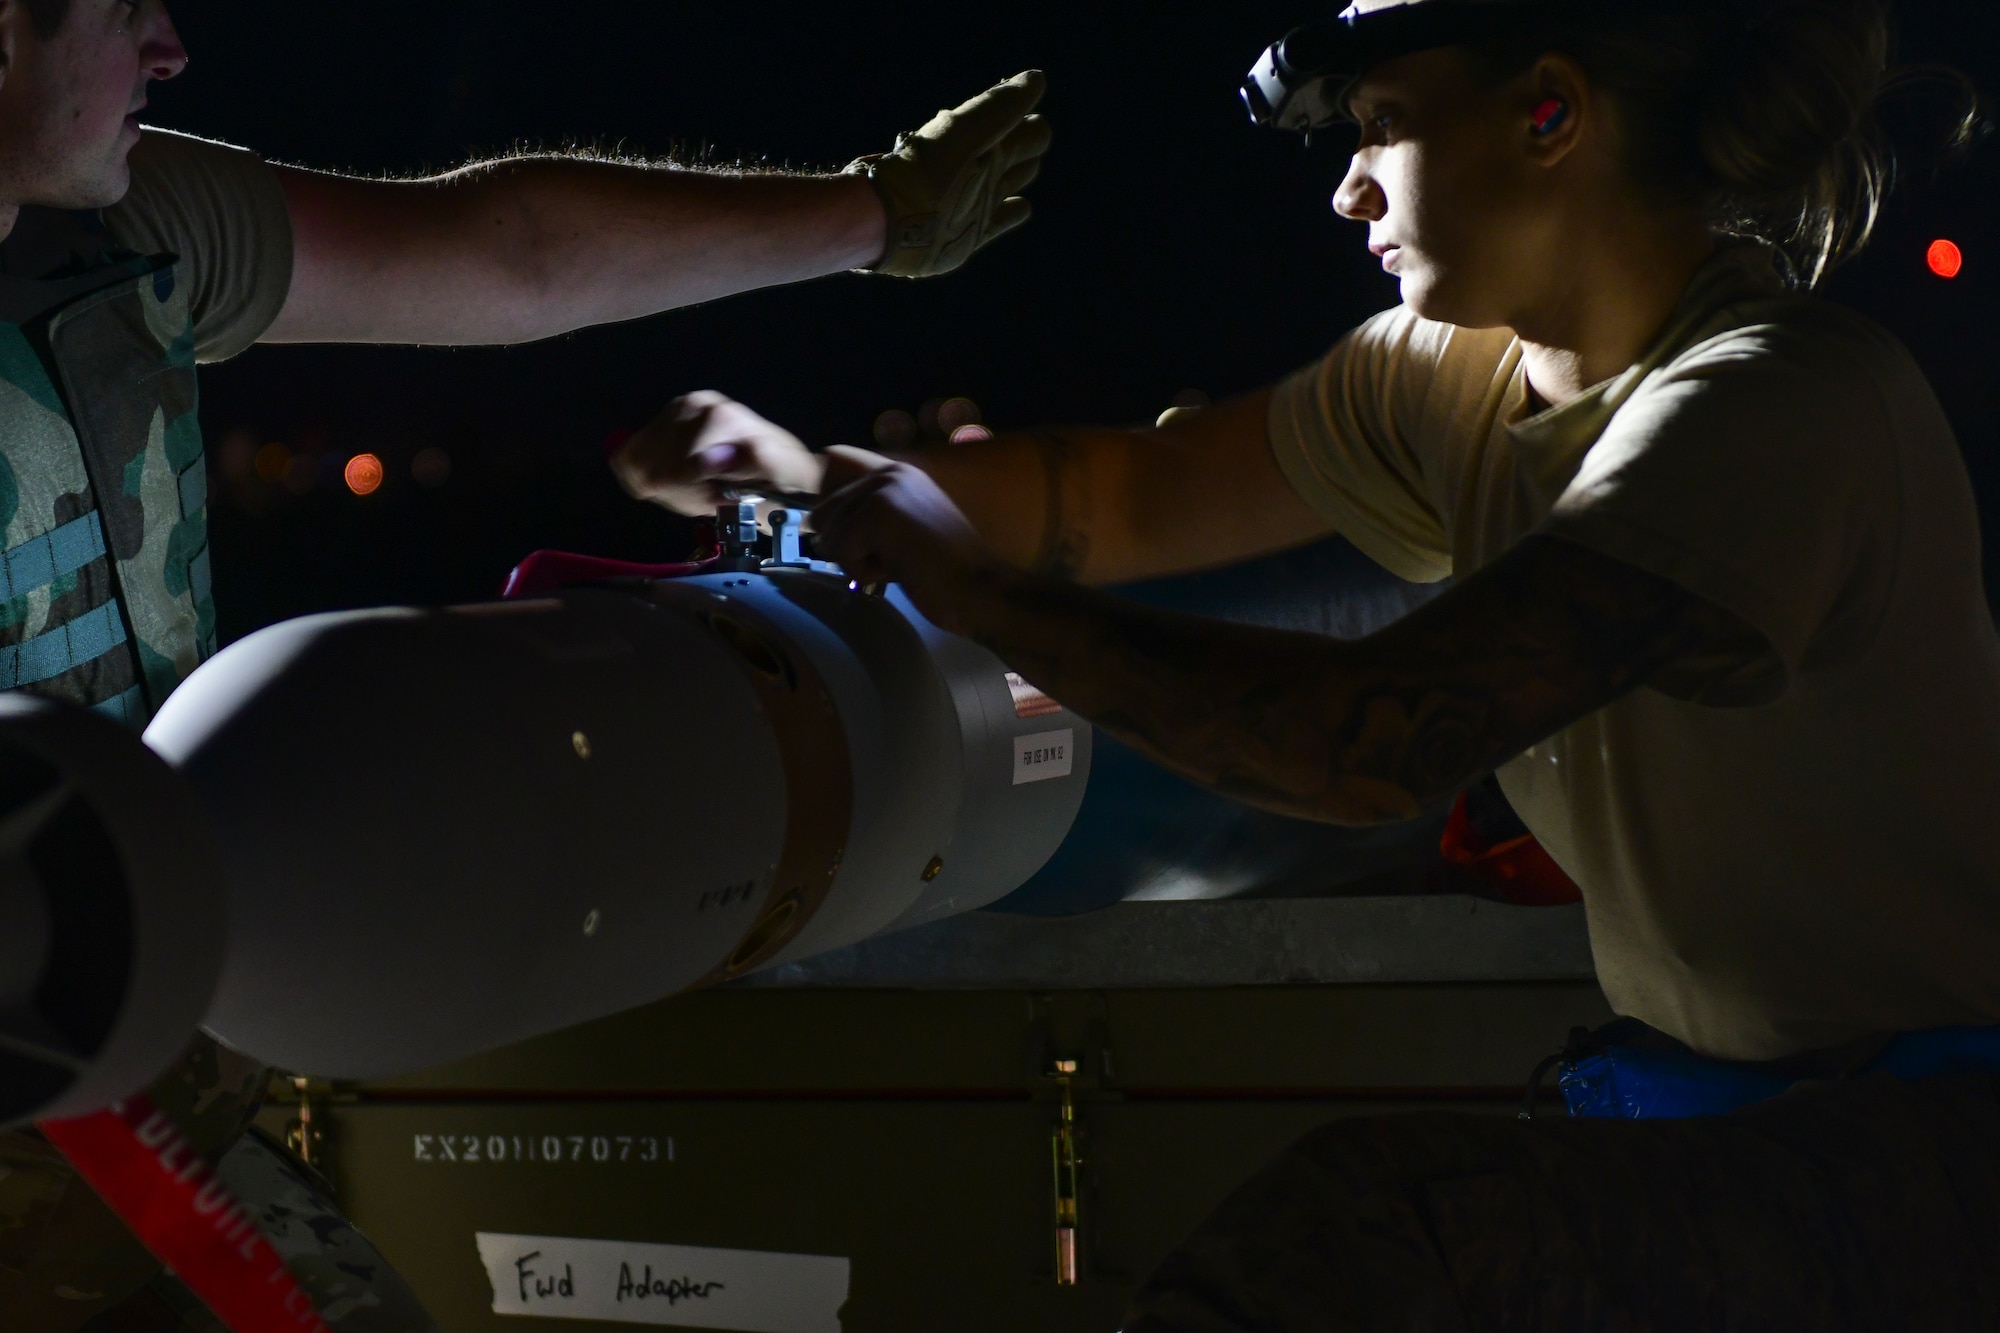 U.S. Air Force Airmen from the 355th Equipment Maintenance Squadron work together to build an [inert] GBU-12 Paveway II, an aerial laser-guided bomb, in a simulated deployed location on the flight line at Davis-Monthan Air Force Base, Ariz., April 9, 2019.